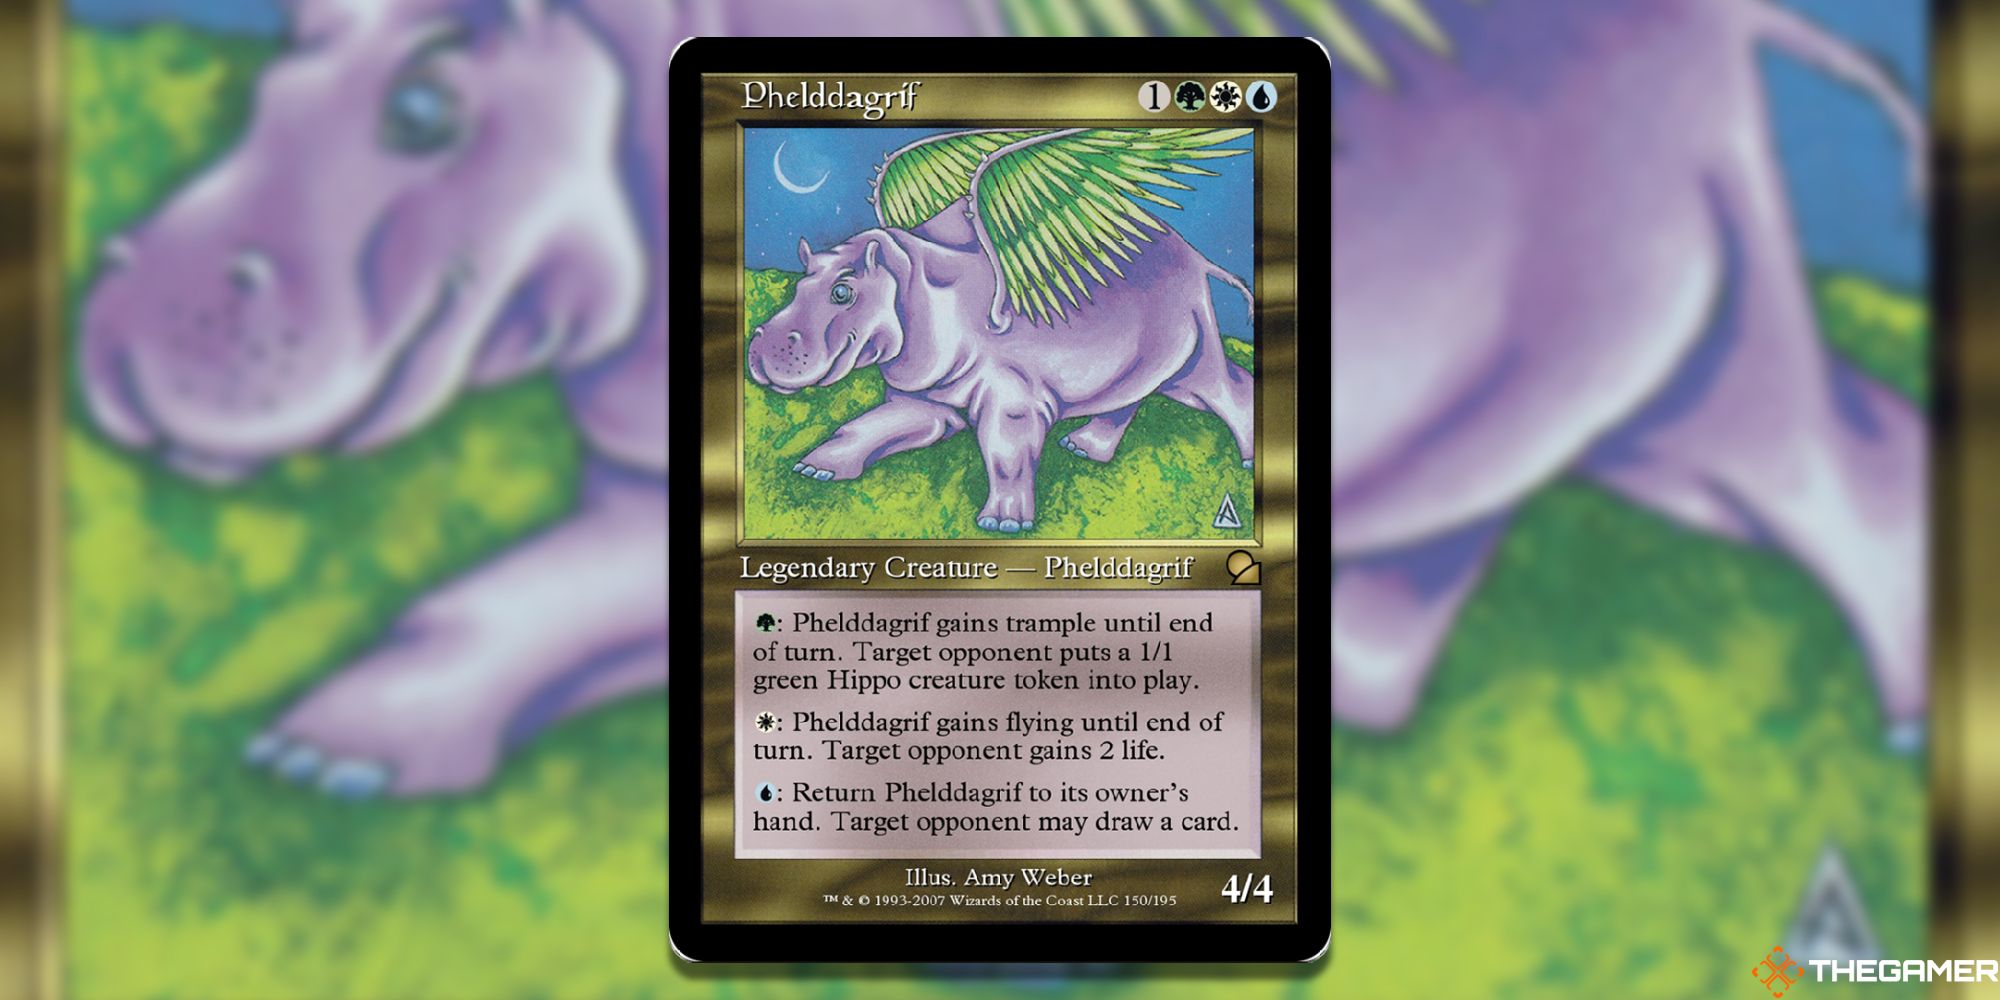 Image of the Phelddagriff card in Magic: The Gathering, with art by Amy Weber